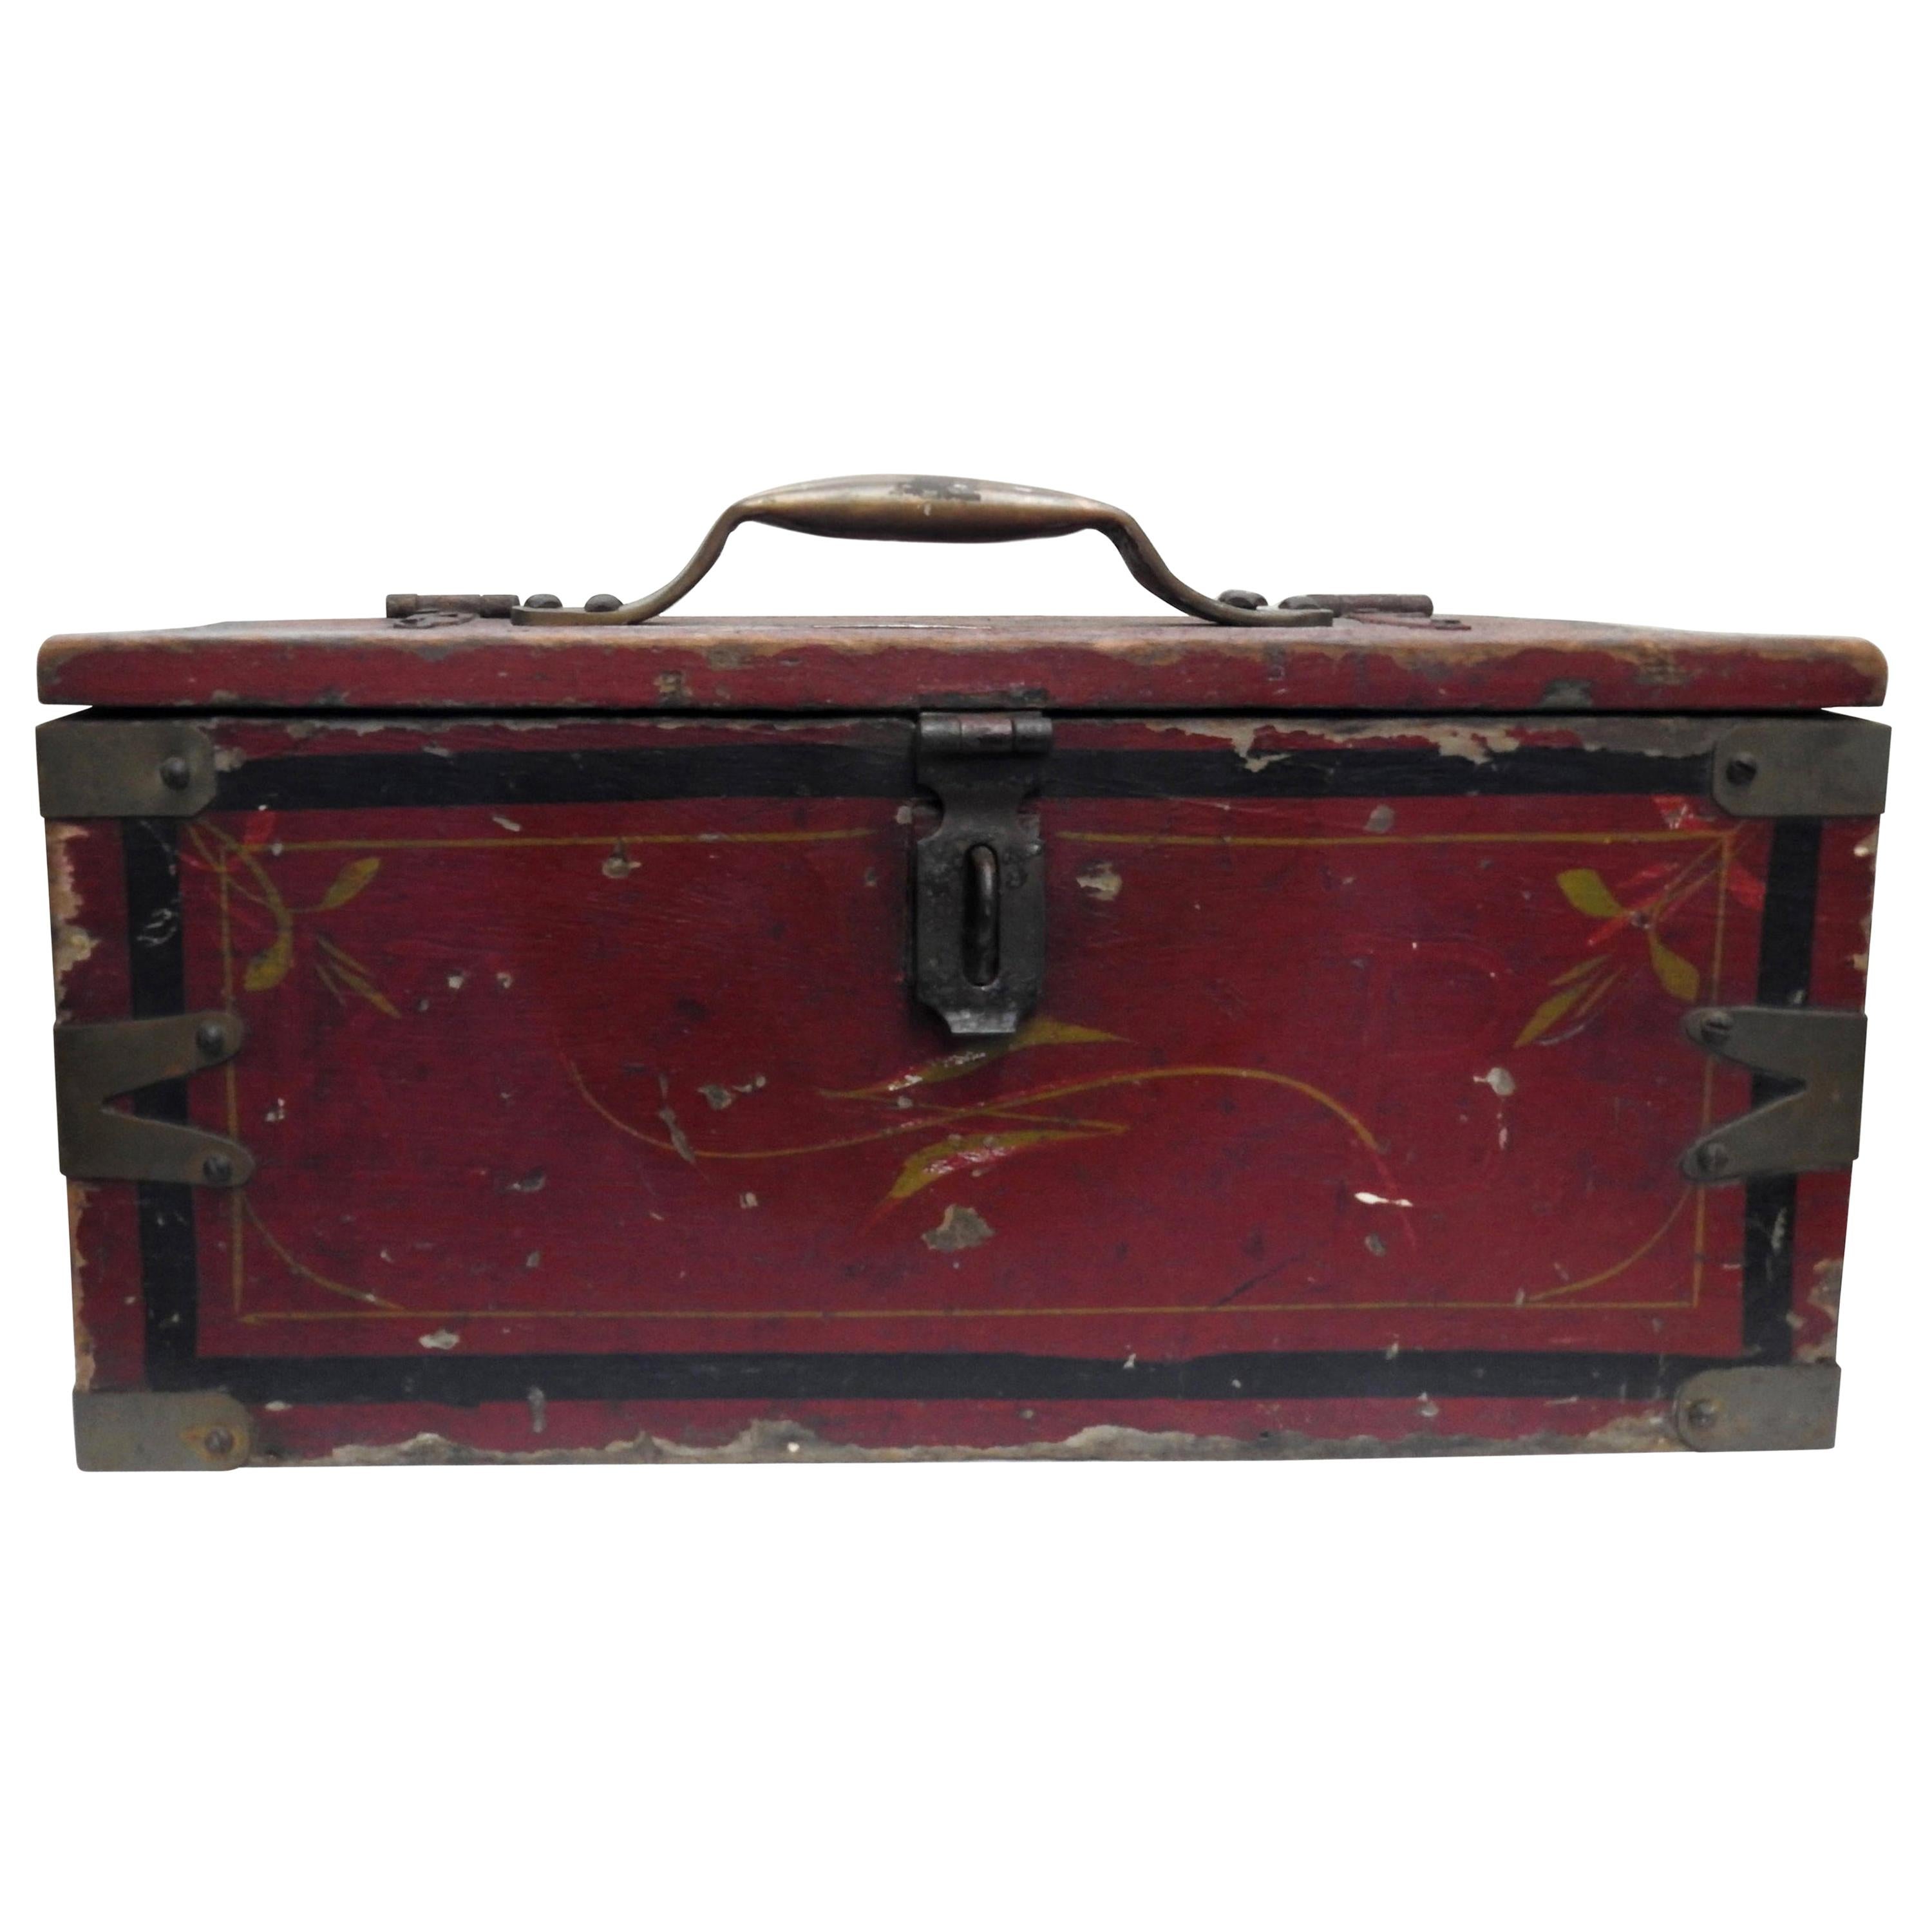 Primitive Wooden Tool Box Hand Painted For Sale